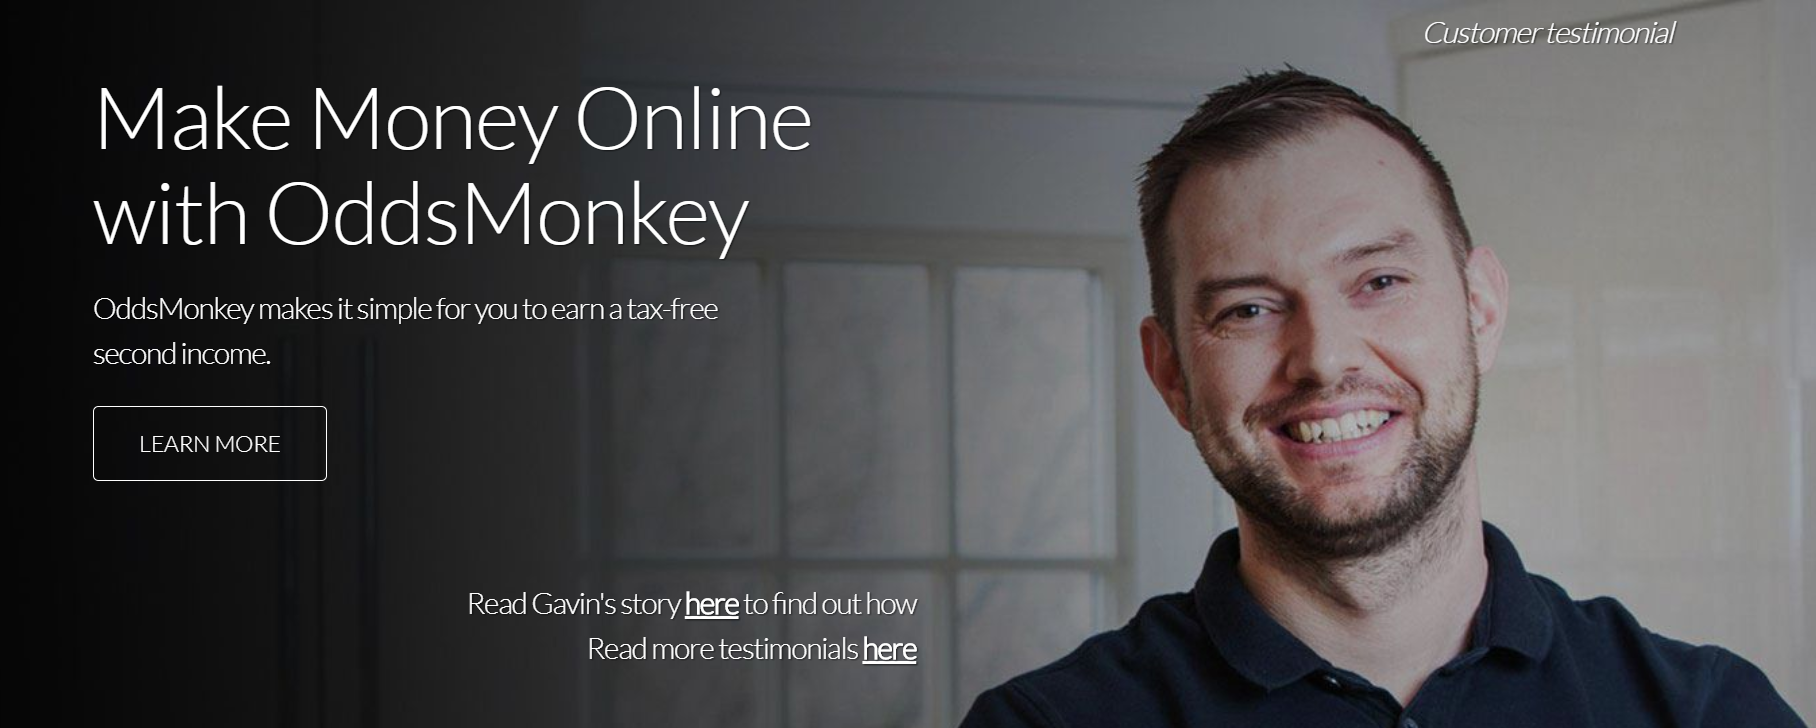 OddsMonkey-Best Matched Betting Services (Best Matched Betting Website, Match Betting Site, Top Service 2018)